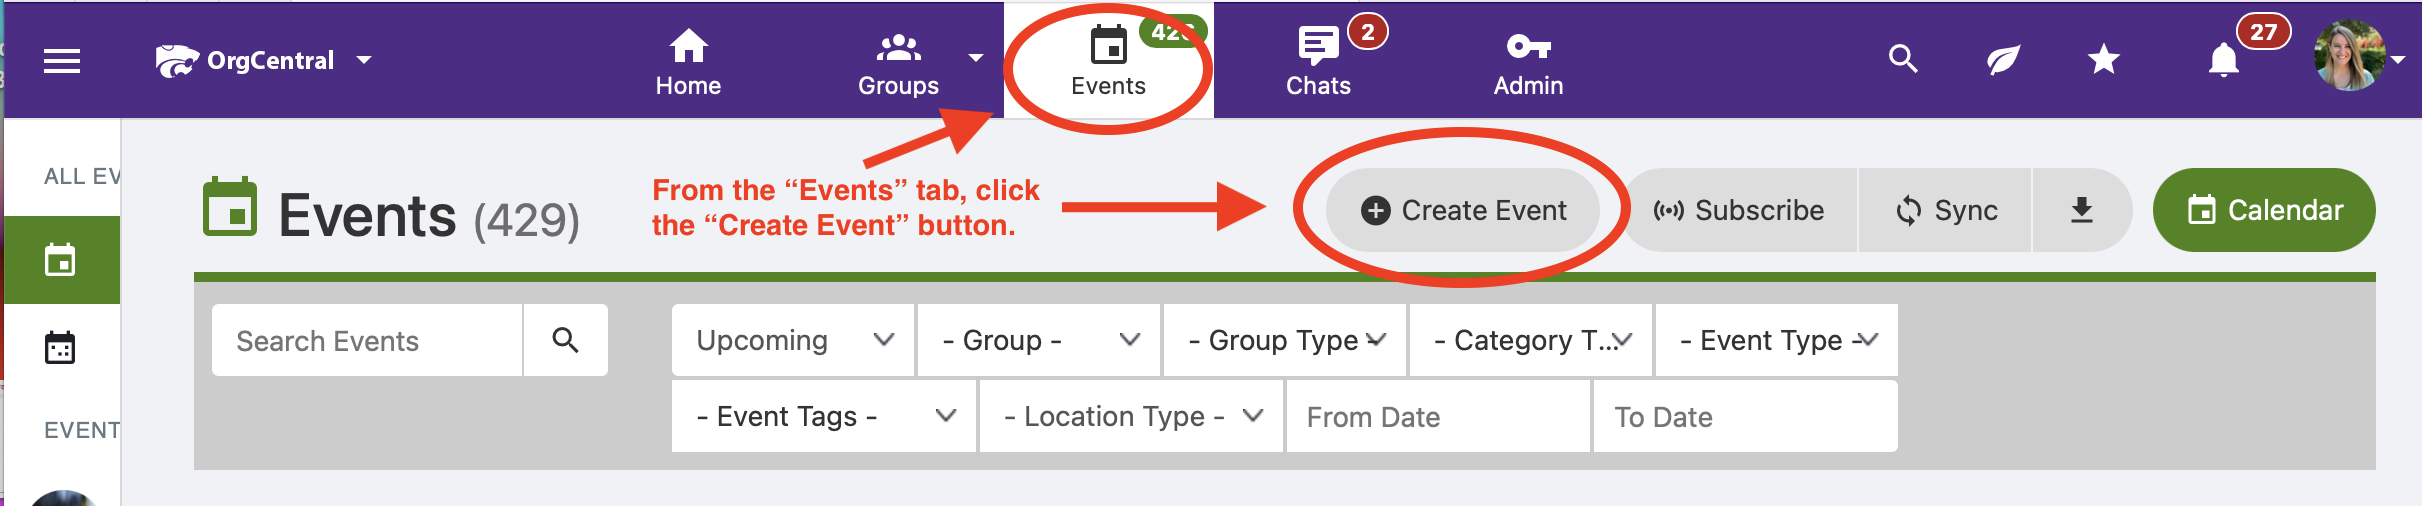 OrgCentral Event Creation Button